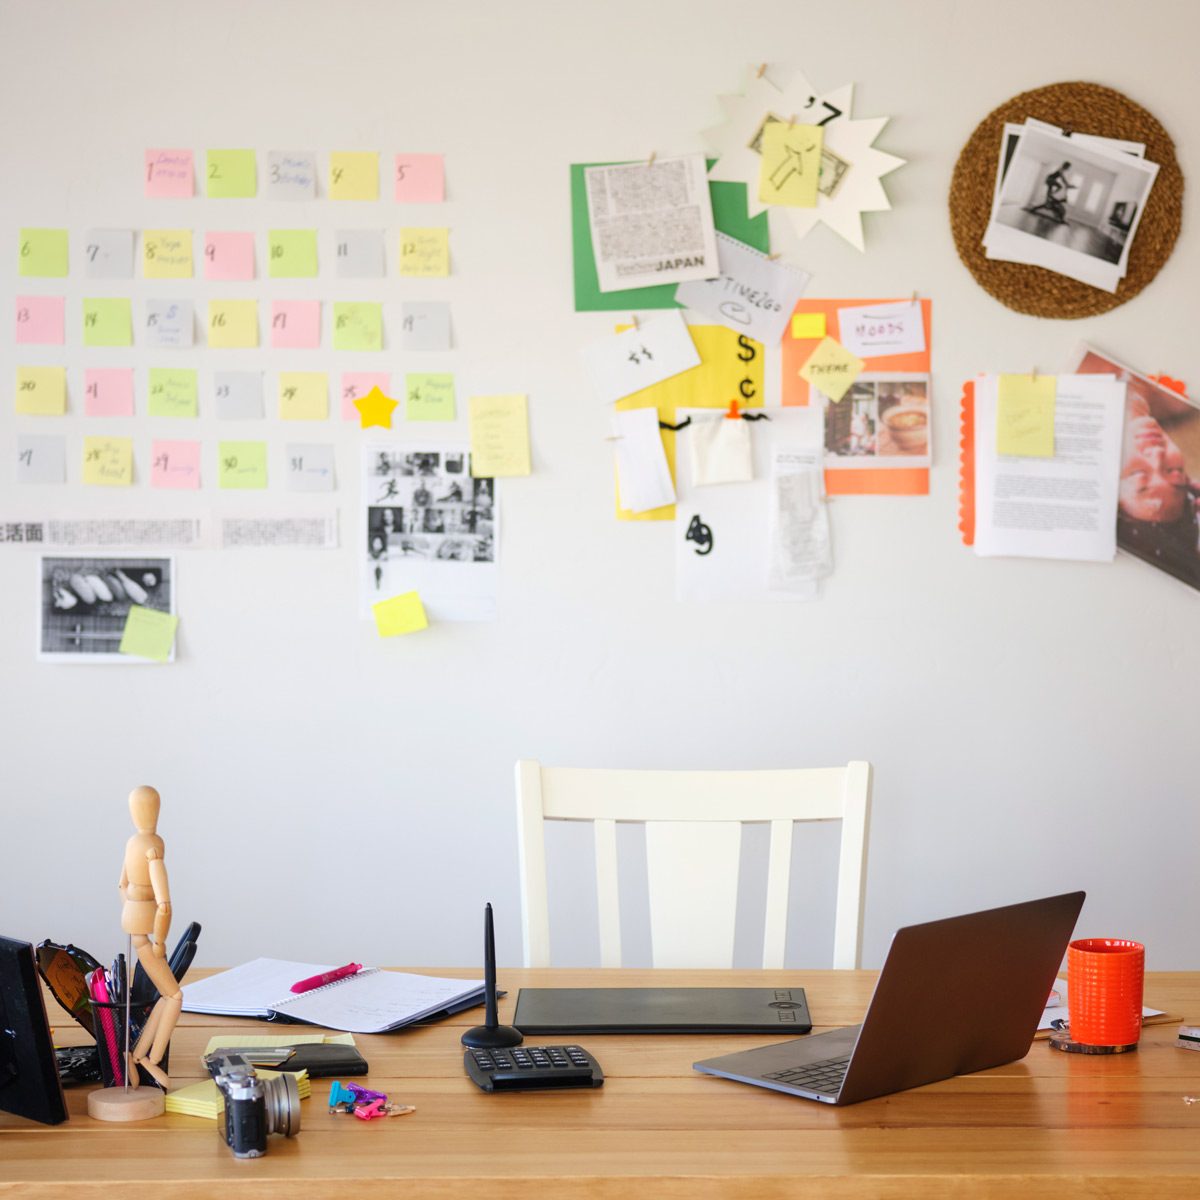 15 Home Office Organization Ideas and Tips